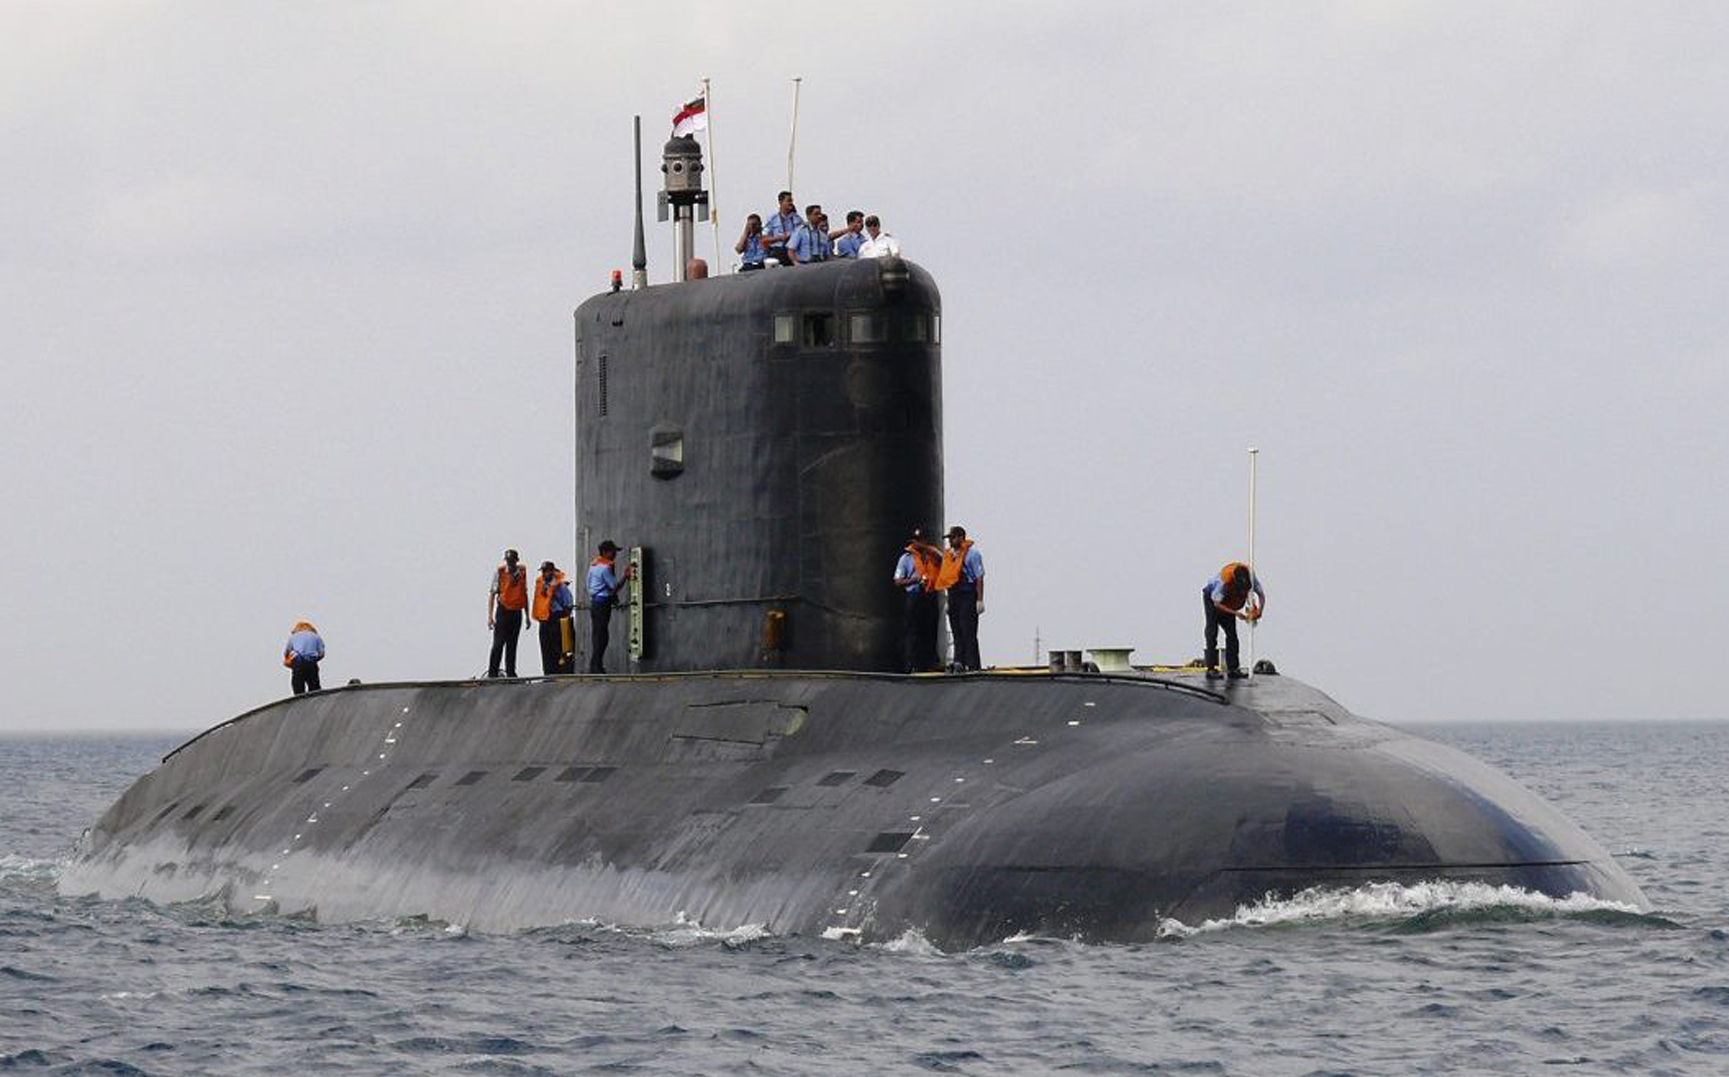 India to deliver INS sindhuvir to Myanmar